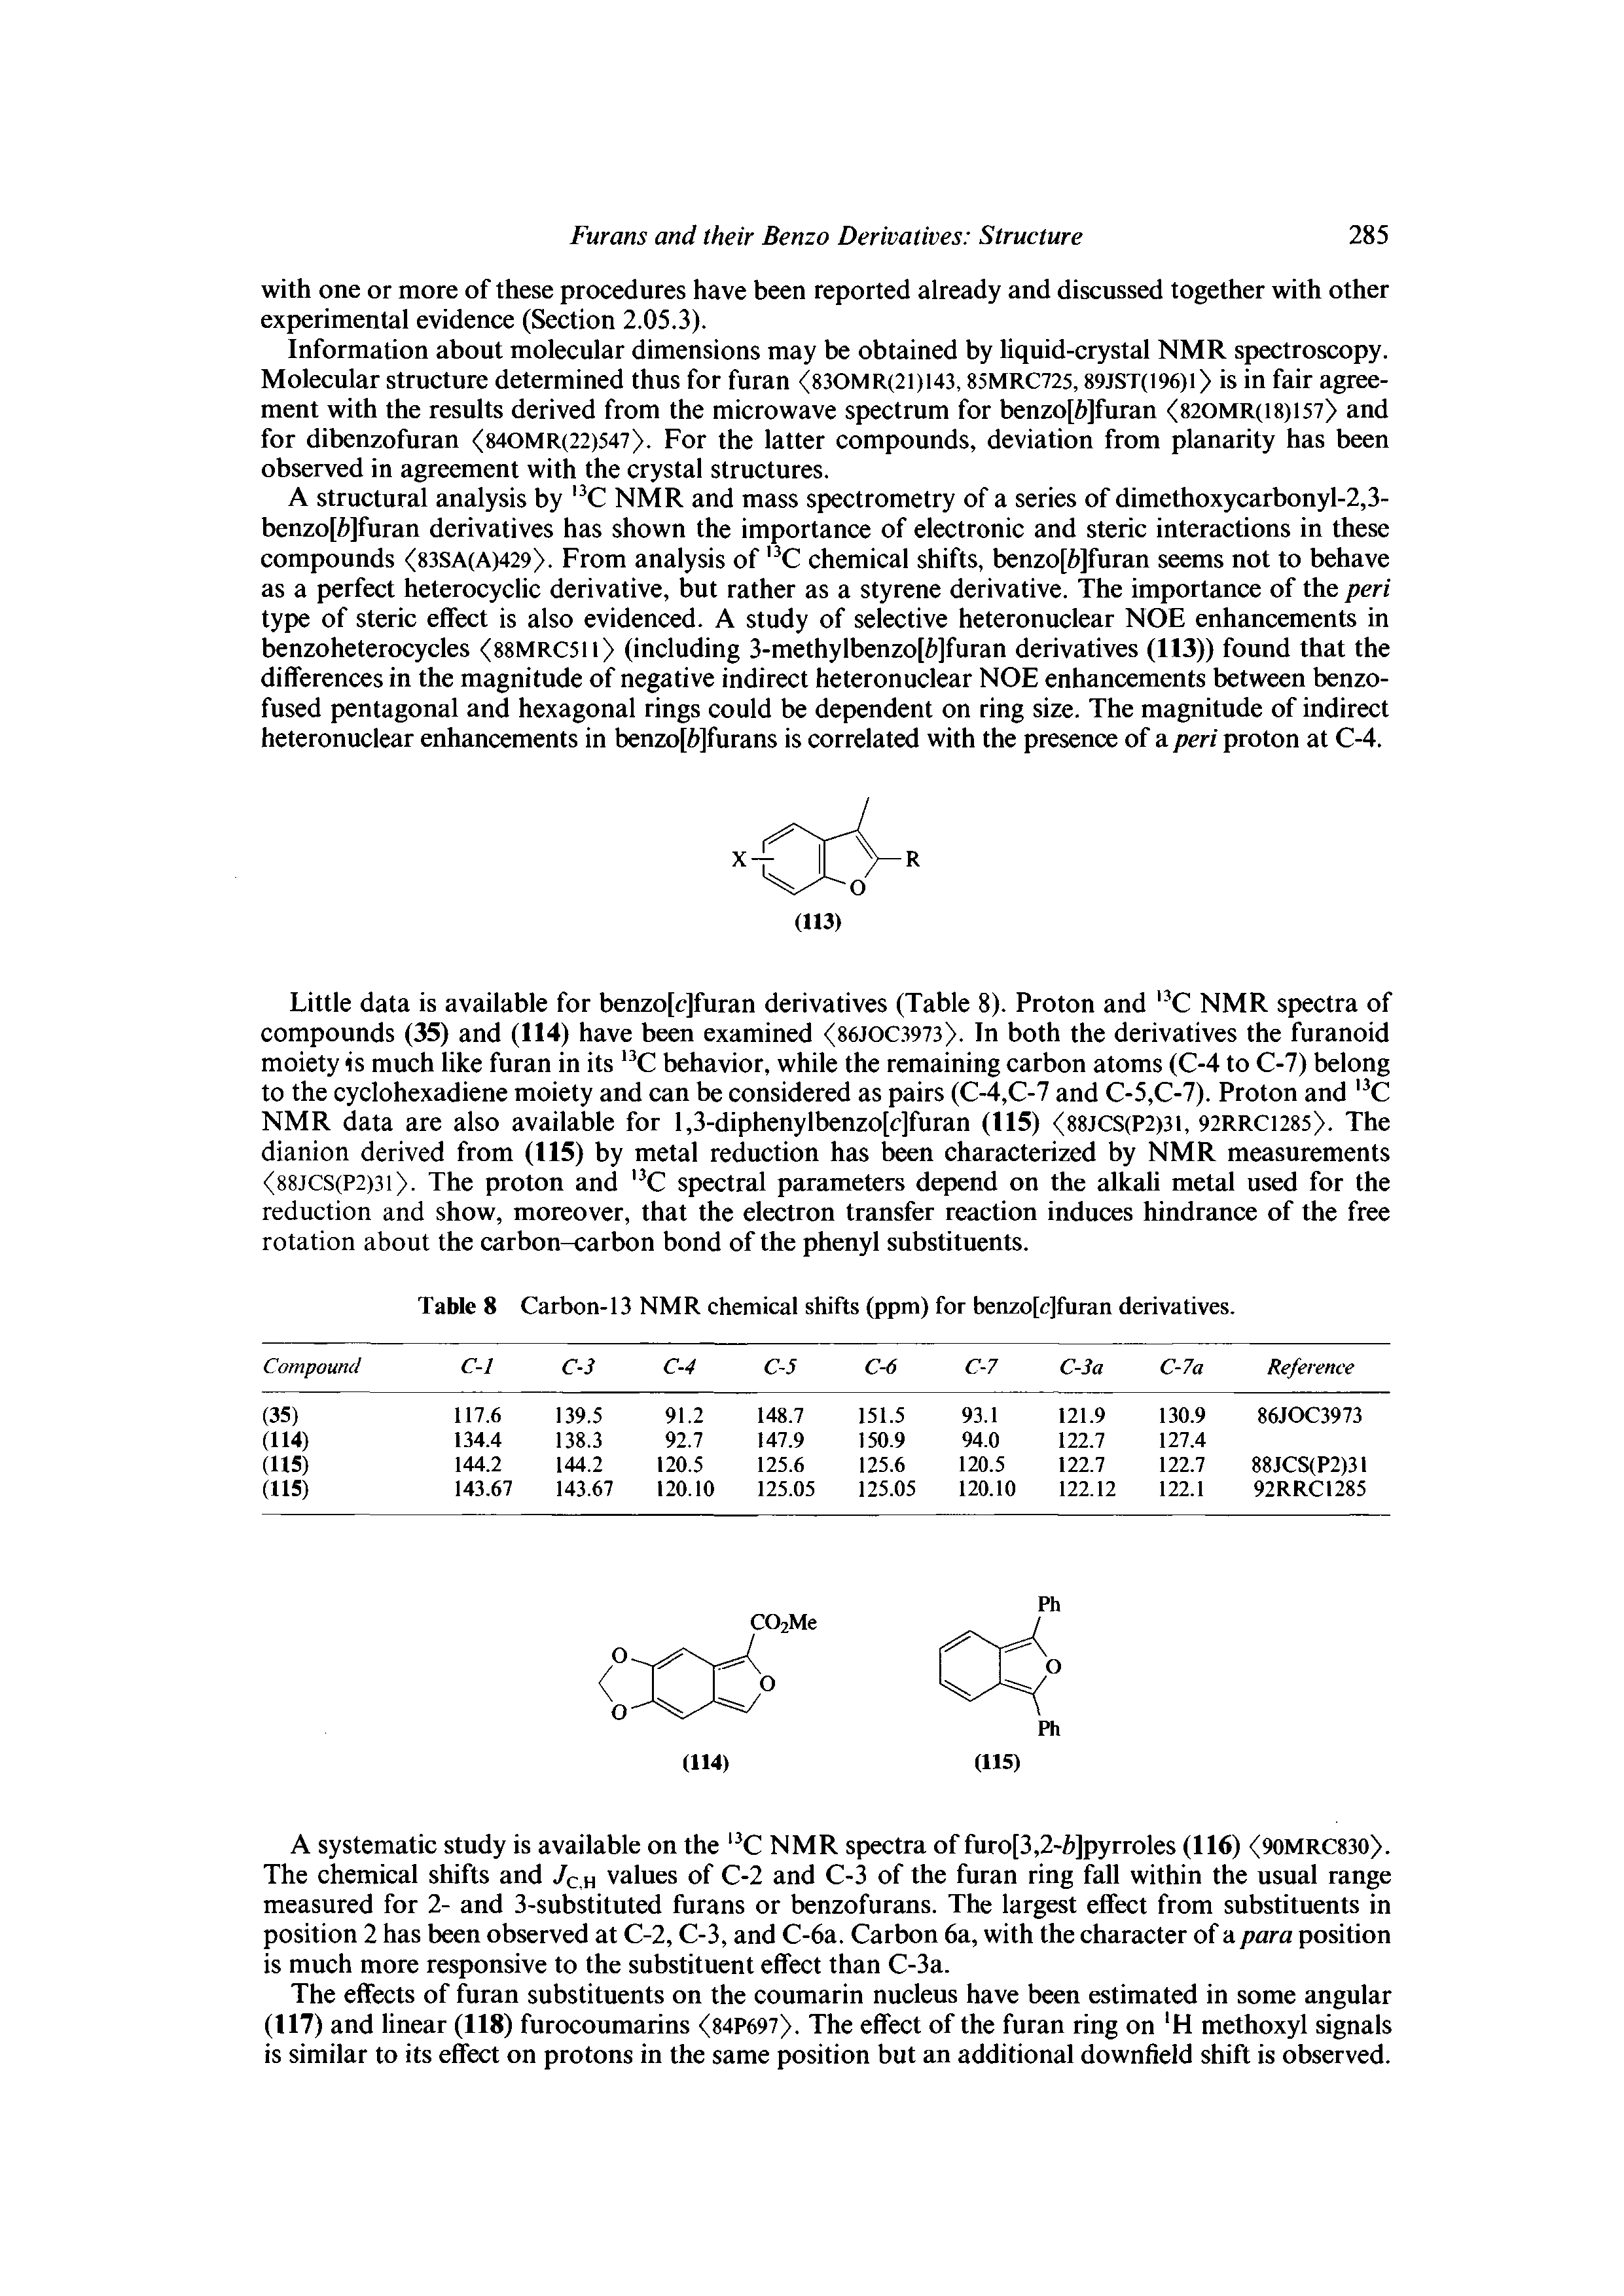 Table 8 Carbon-13 NMR chemical shifts (ppm) for benzo[c]furan derivatives.